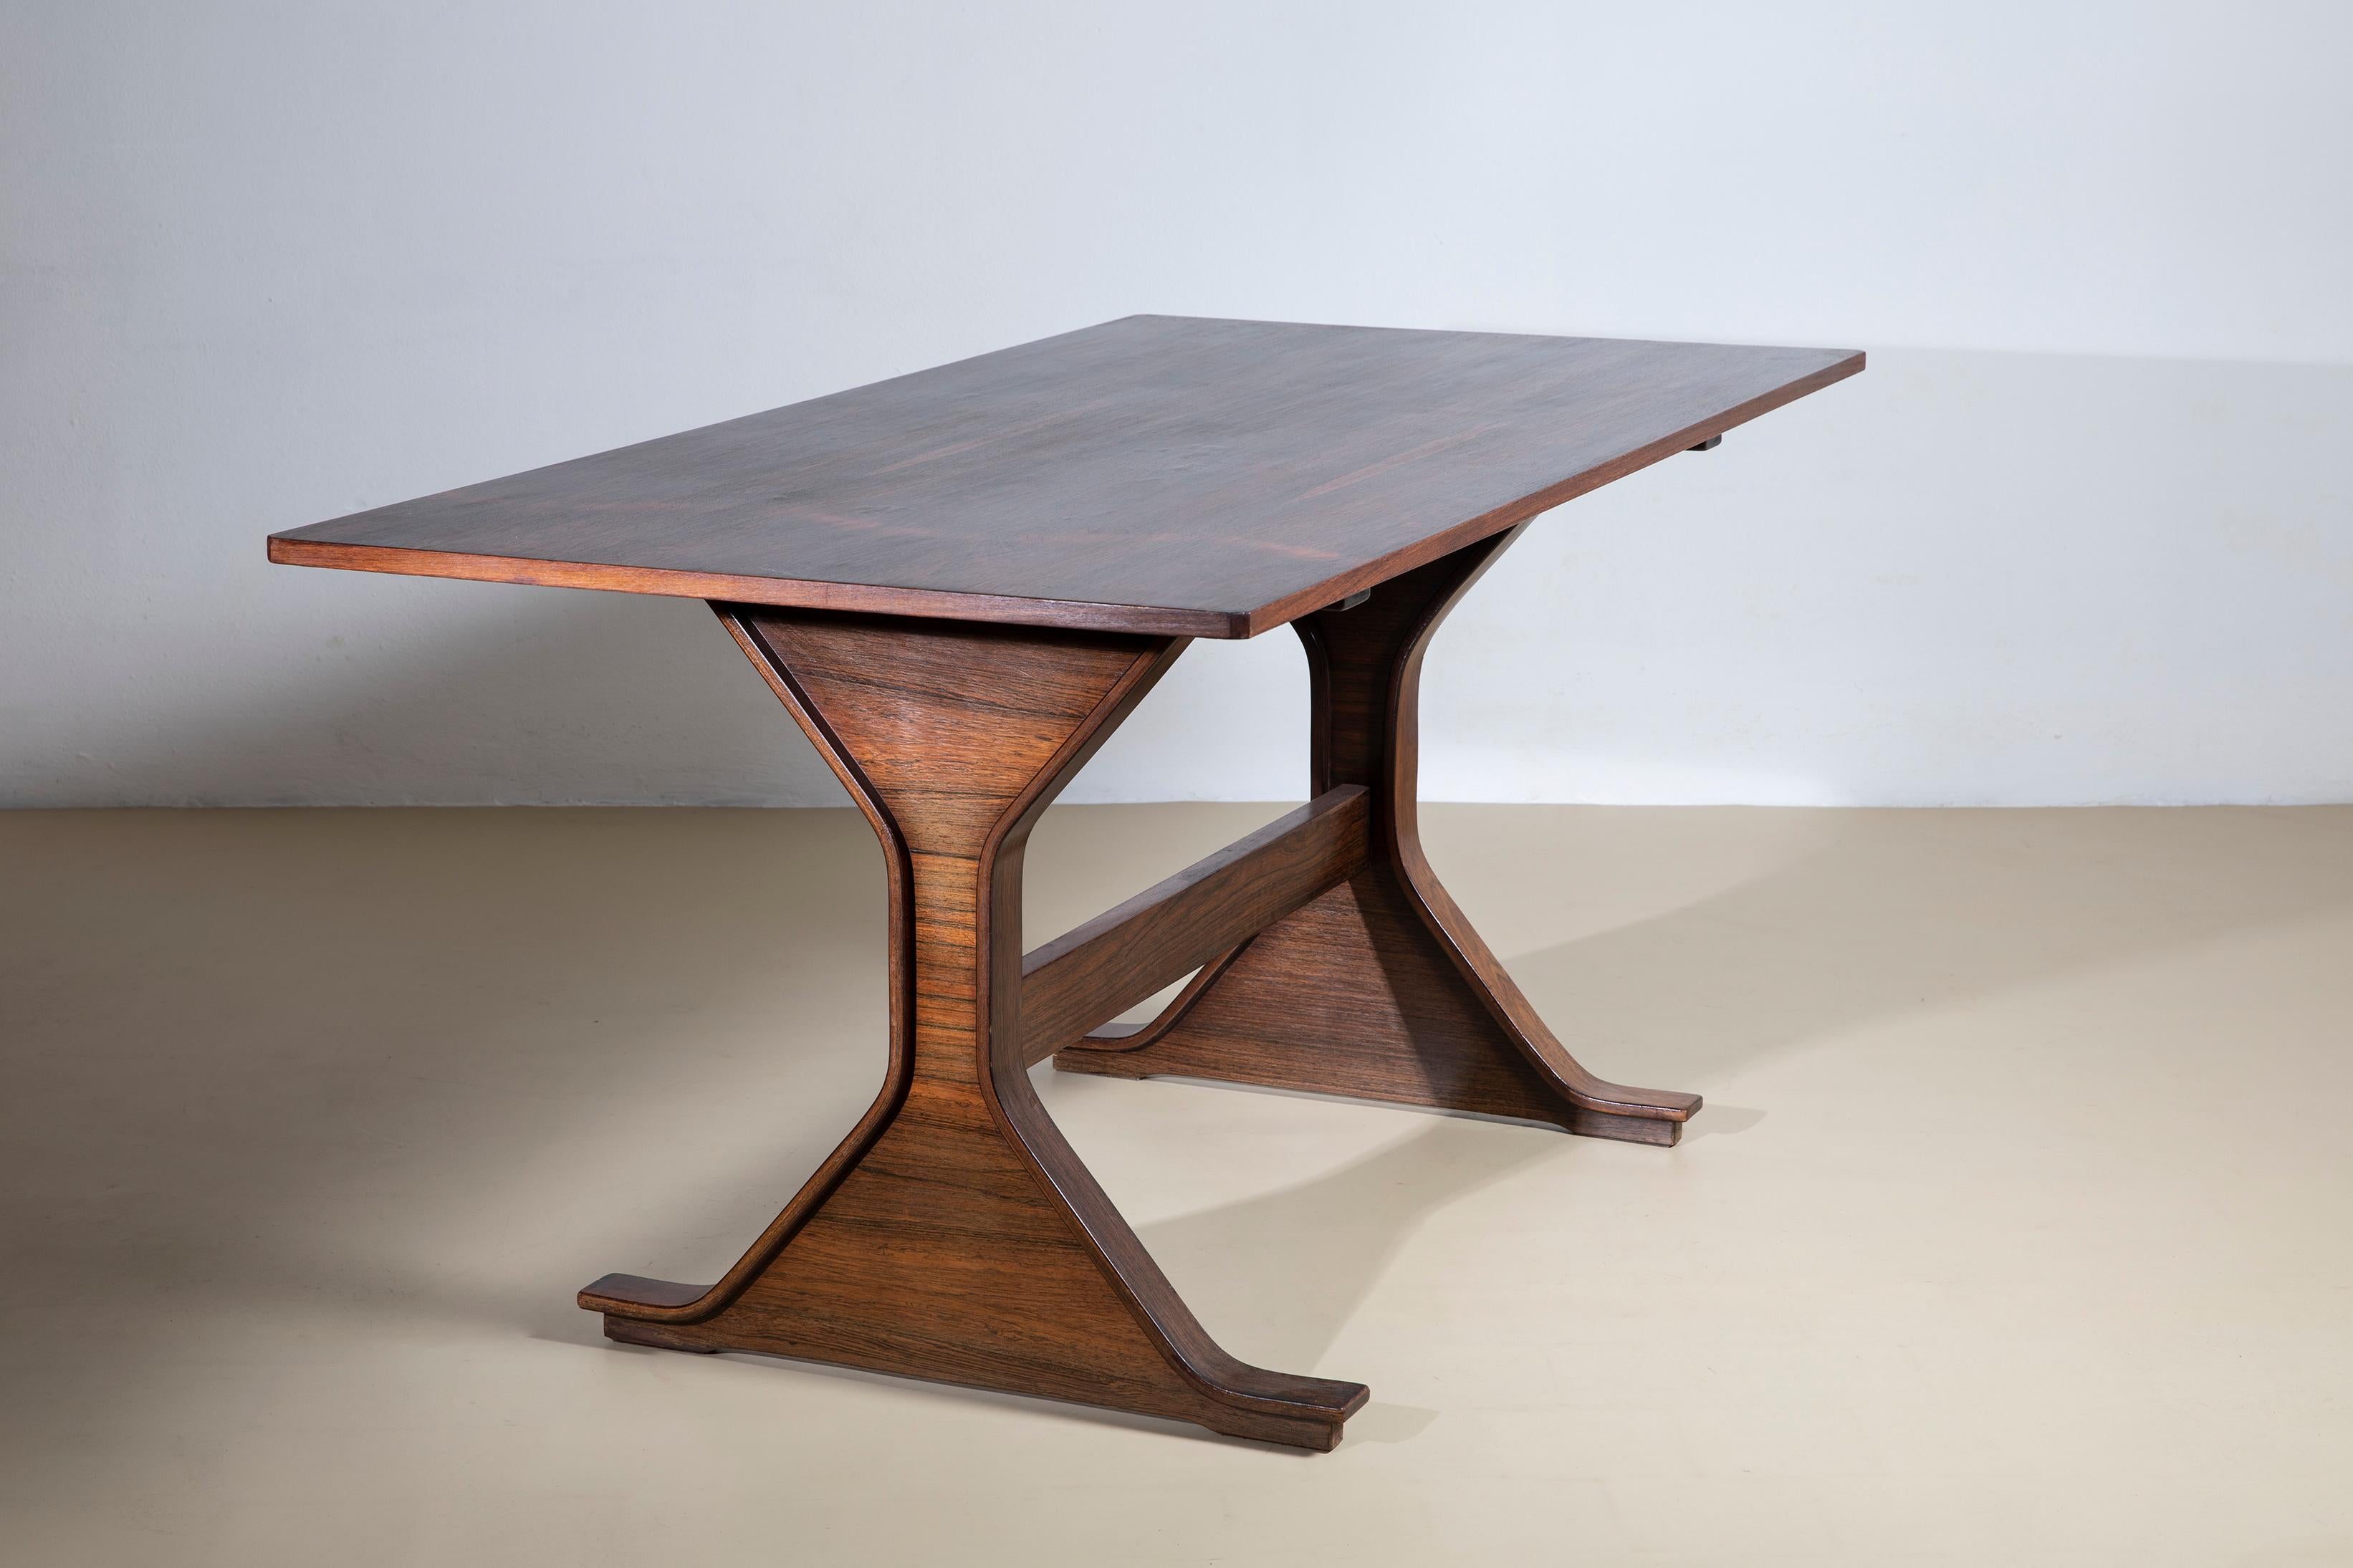 Rectangular dining table model 522, designed by Gianfranco Frattini and produced by Bernini starting in 1960, made of walnut wood. The table is in good condition, showing normal wear and tear due to time and use. 

Bibliography: 
Domus 401, p. 120,